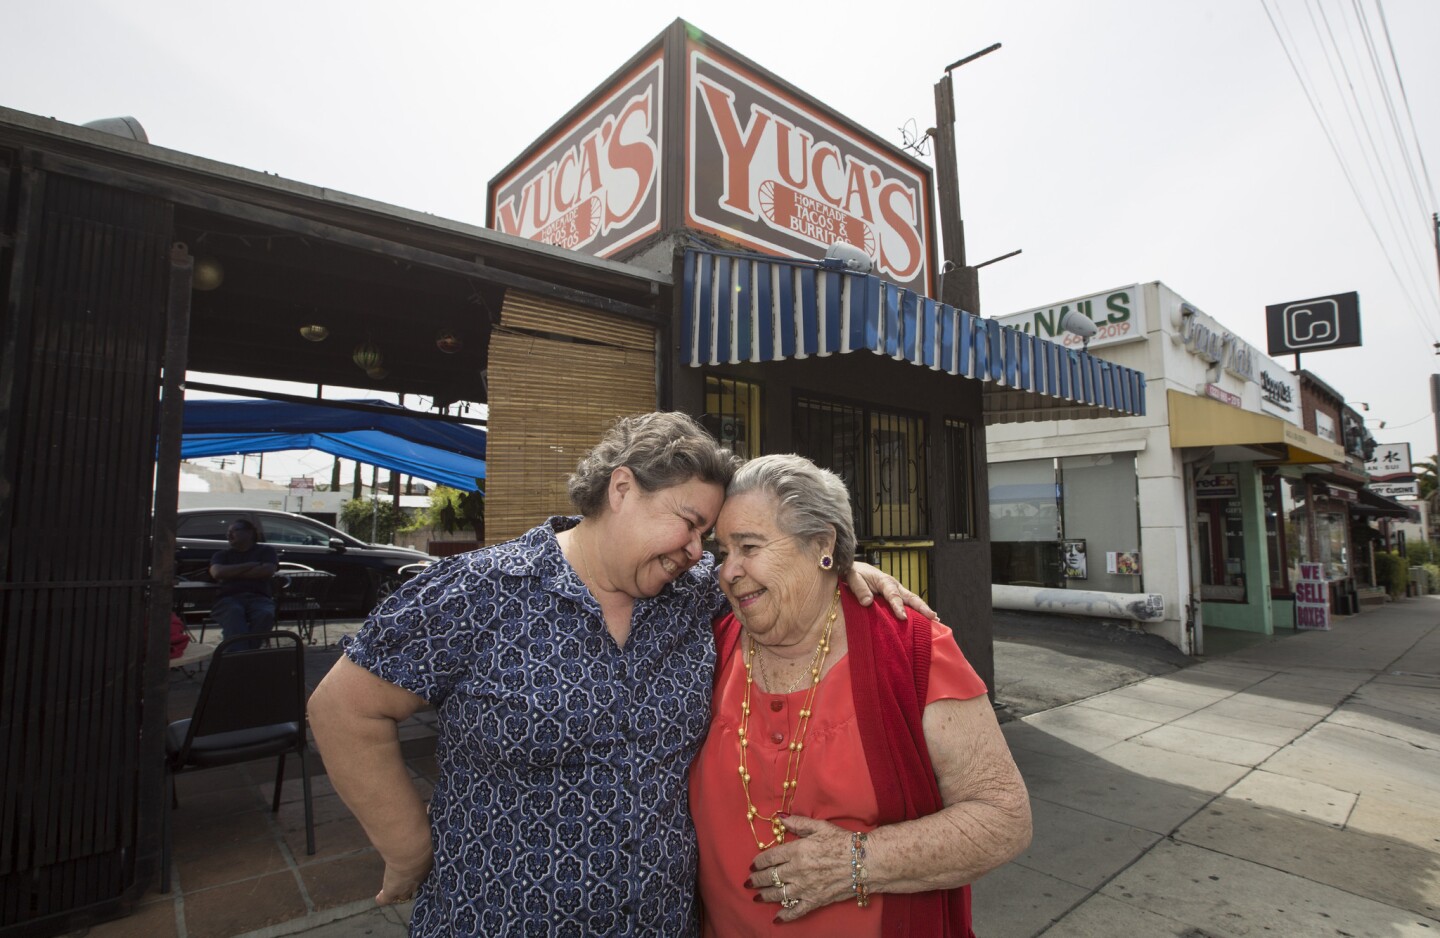 Dora Herrera, left, and her mother Soccoro Herrera put their heads together outside their Yuca's tacos location on Hillhurt Avenue in Los Feliz.